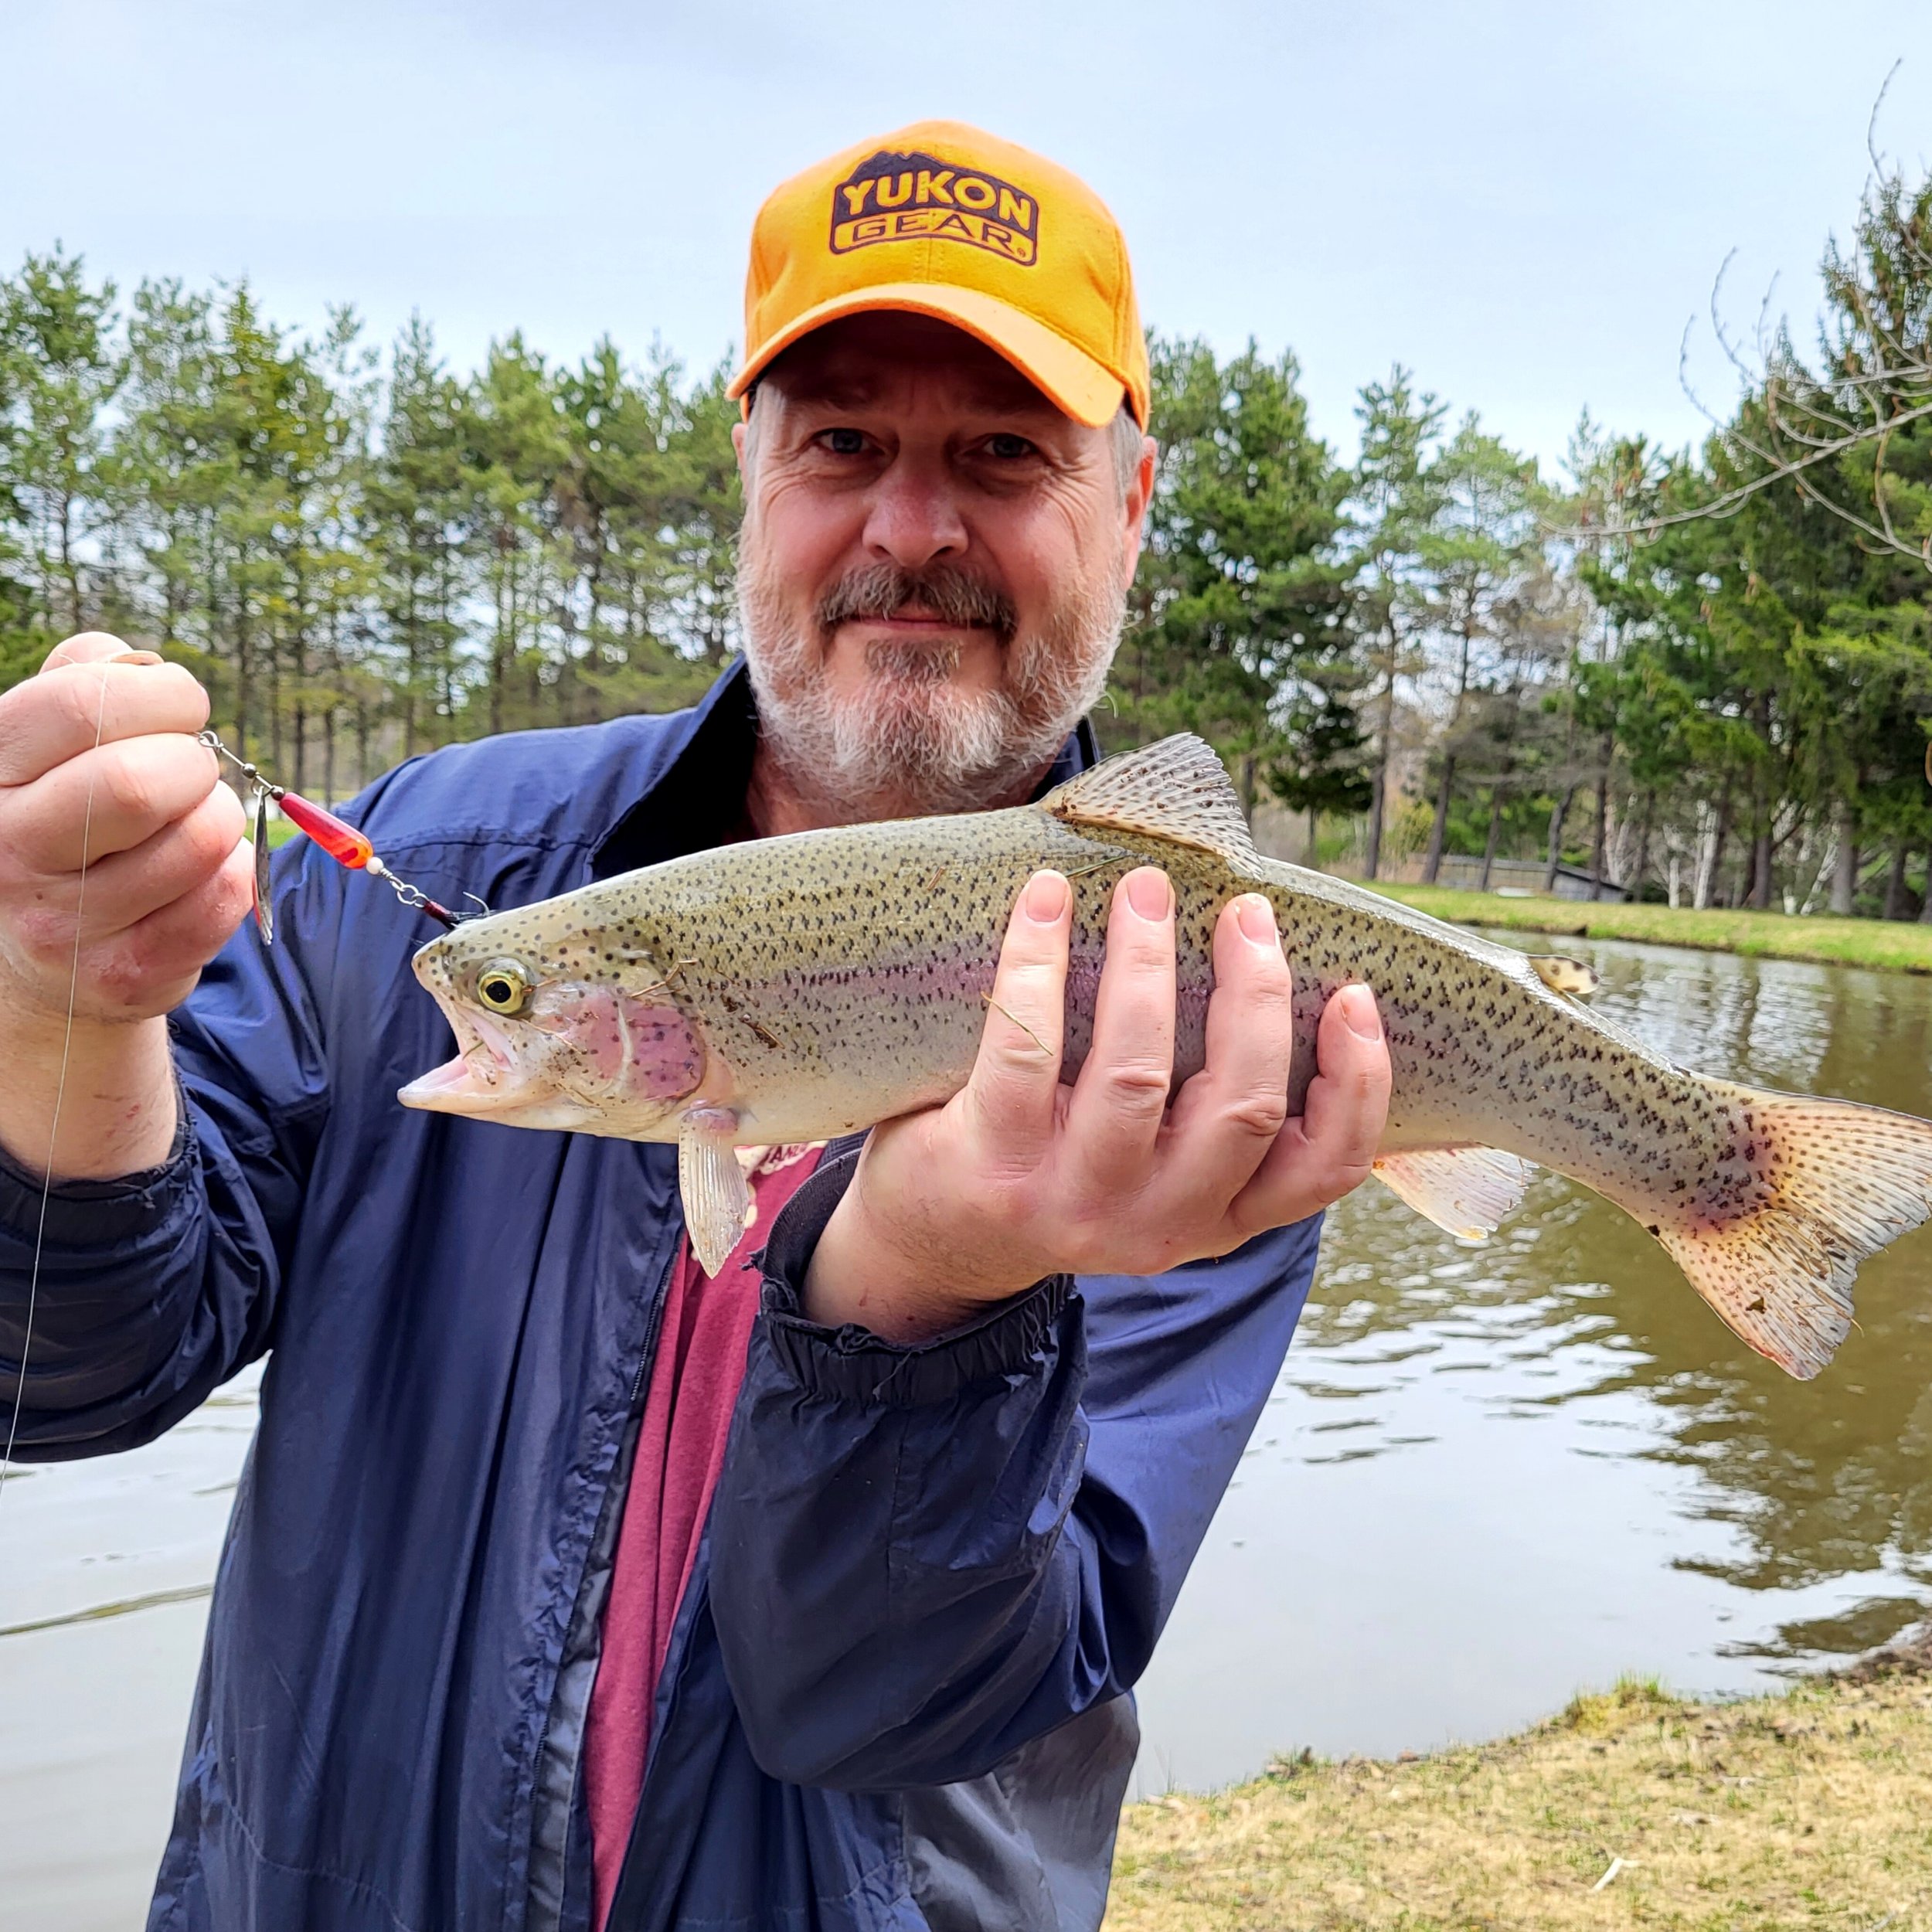 Gagetown Fish Farm - Will It Catch? — DEAD END LURES